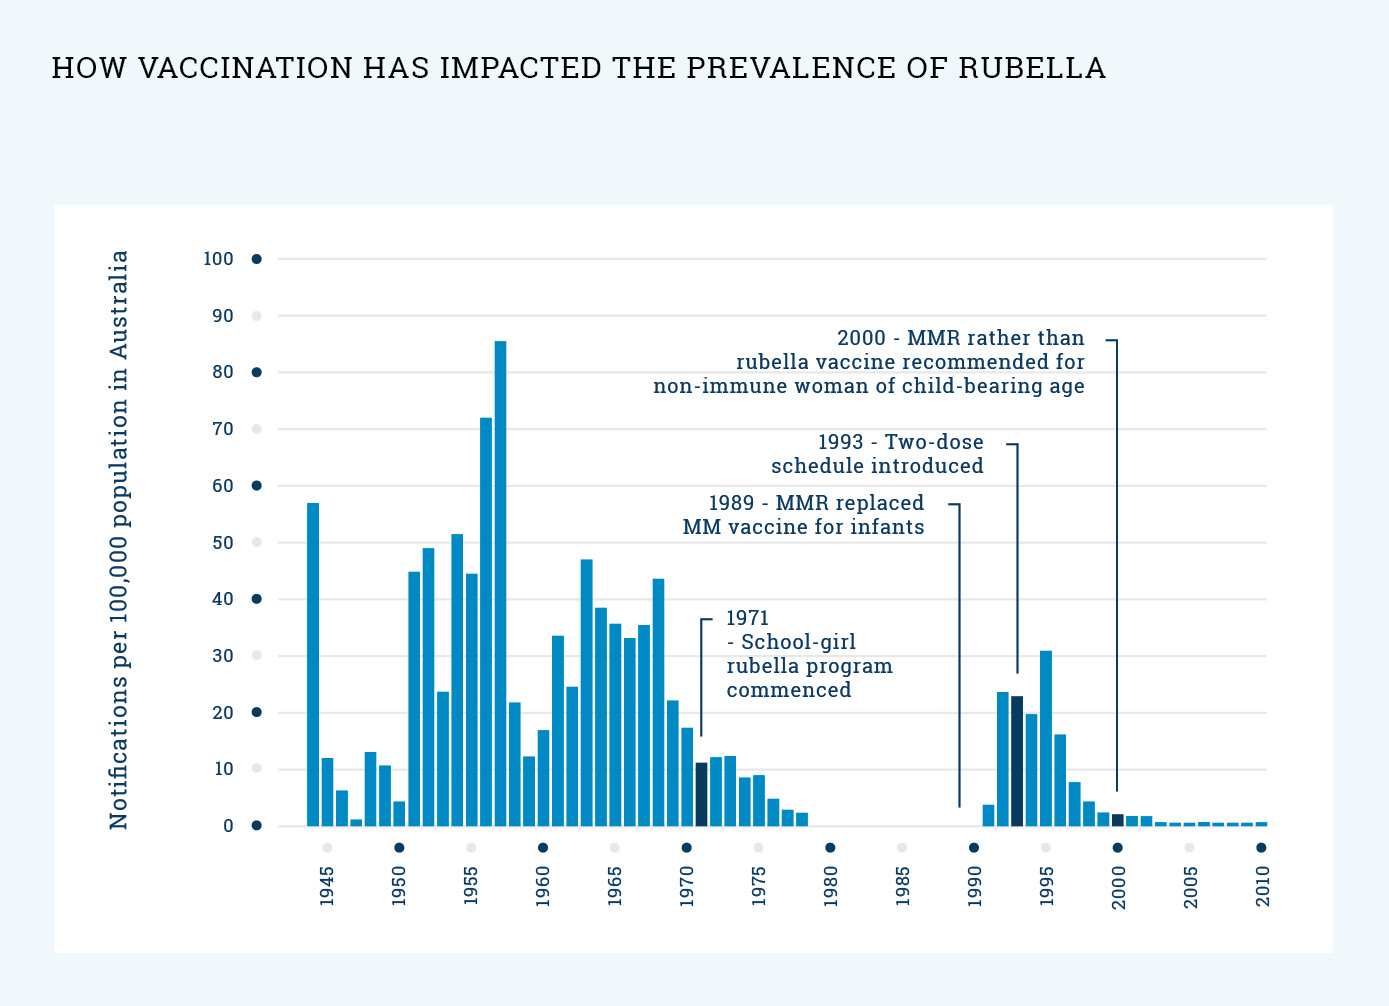 What impact has vaccination had on the prevalence of rubella?